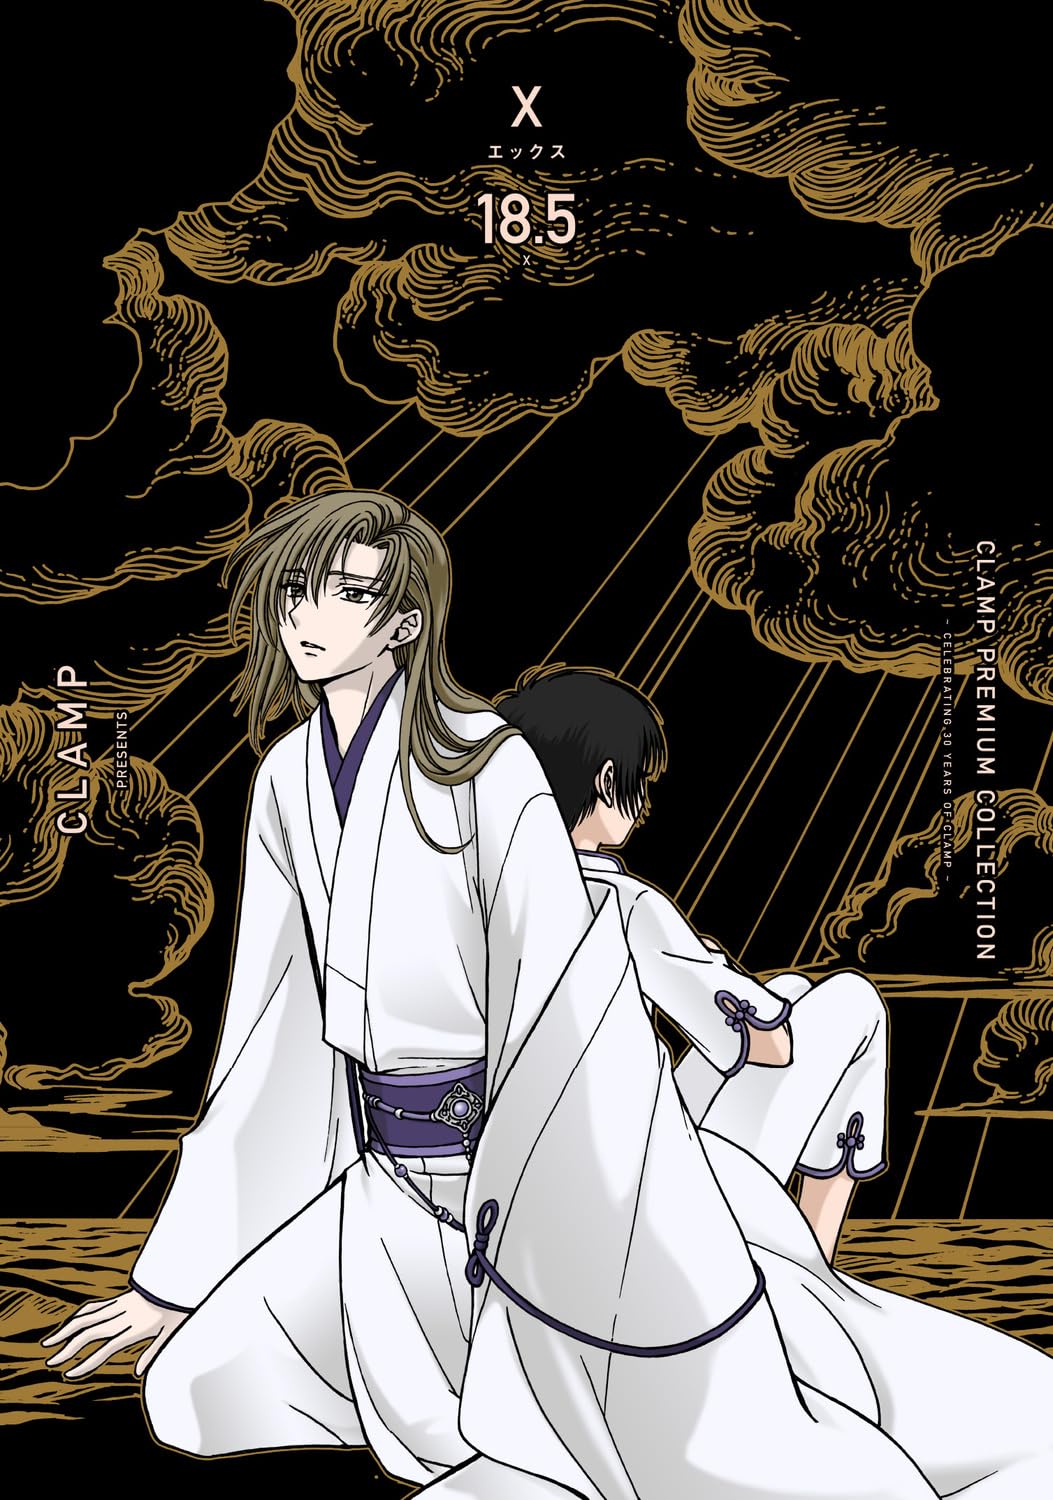 CLAMP PREMIUM COLLECTION X 18.5 – Japanese Book Store